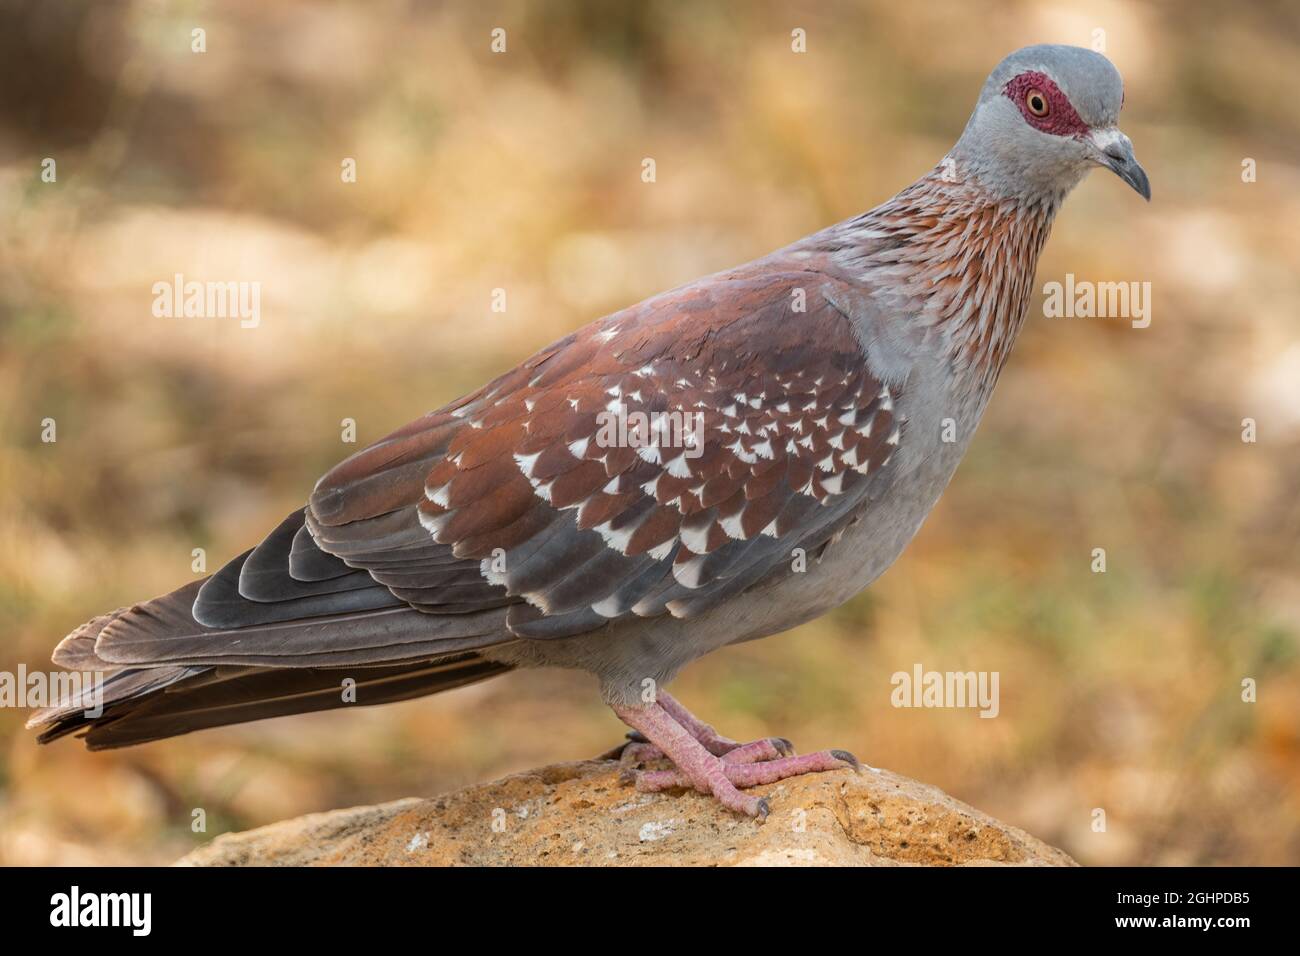 Speckled Pigeon - Columba Guinea, beautiful colored pigeon from African woodlands and gardens, lake Ziway, Ethiopia. Stock Photo